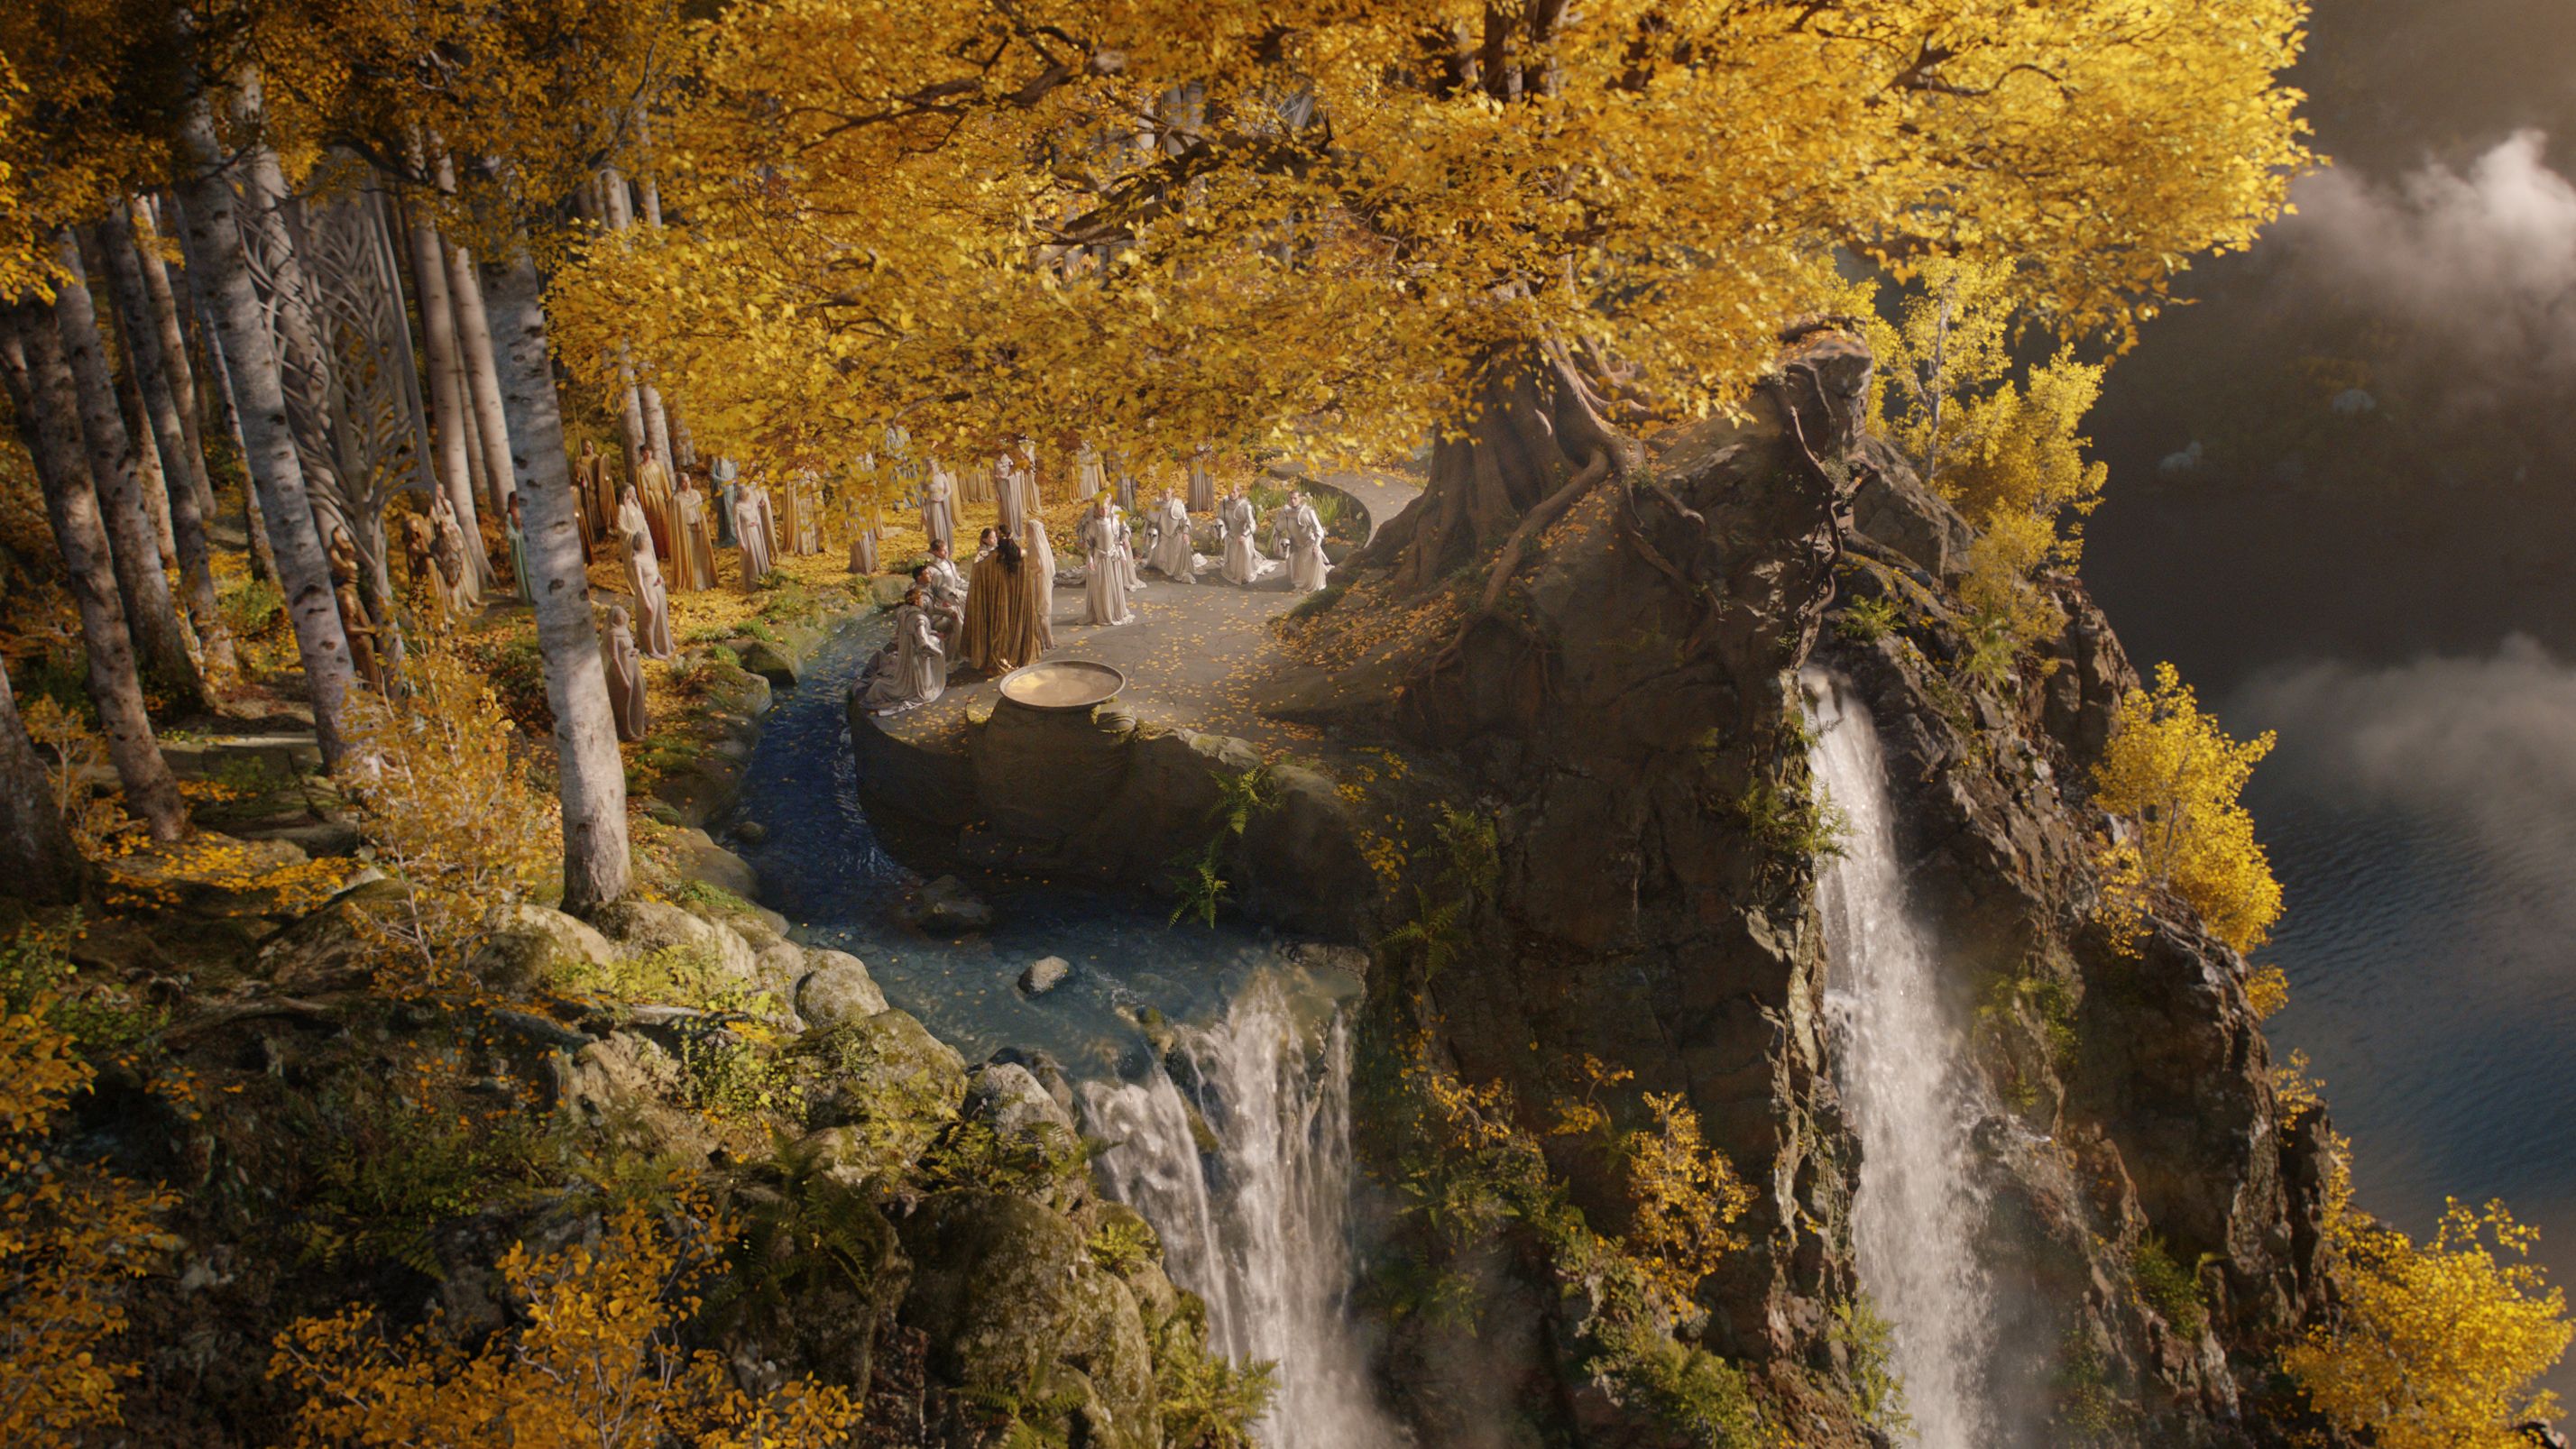 The Lord of The Rings: The Rings of Power Trailer Review – X-Geeks